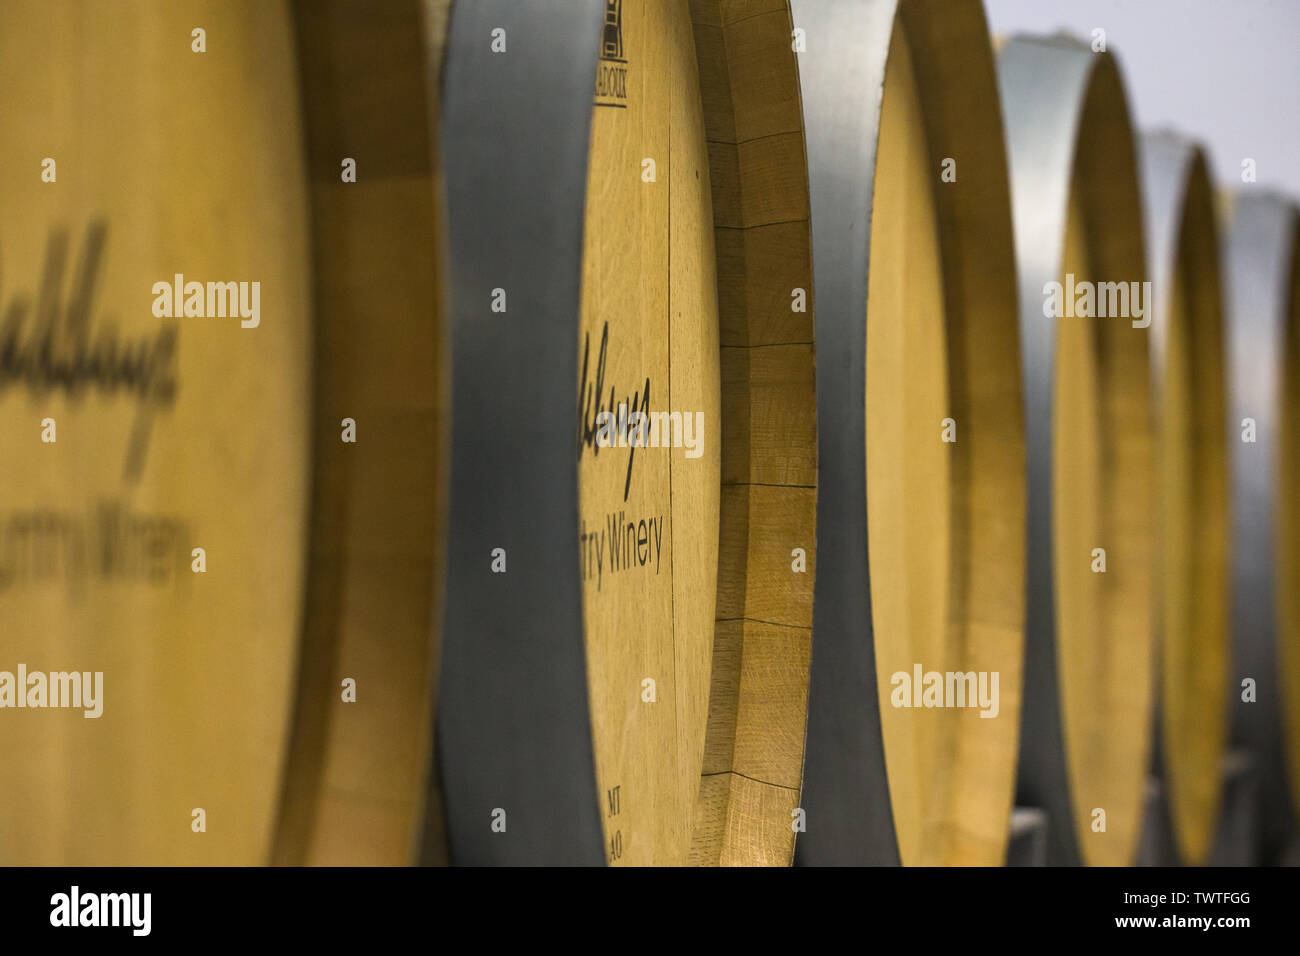 line or row of wooden or wood wine barrels or vats in perspective in a wine cellar in the Cape, South Africa Stock Photo